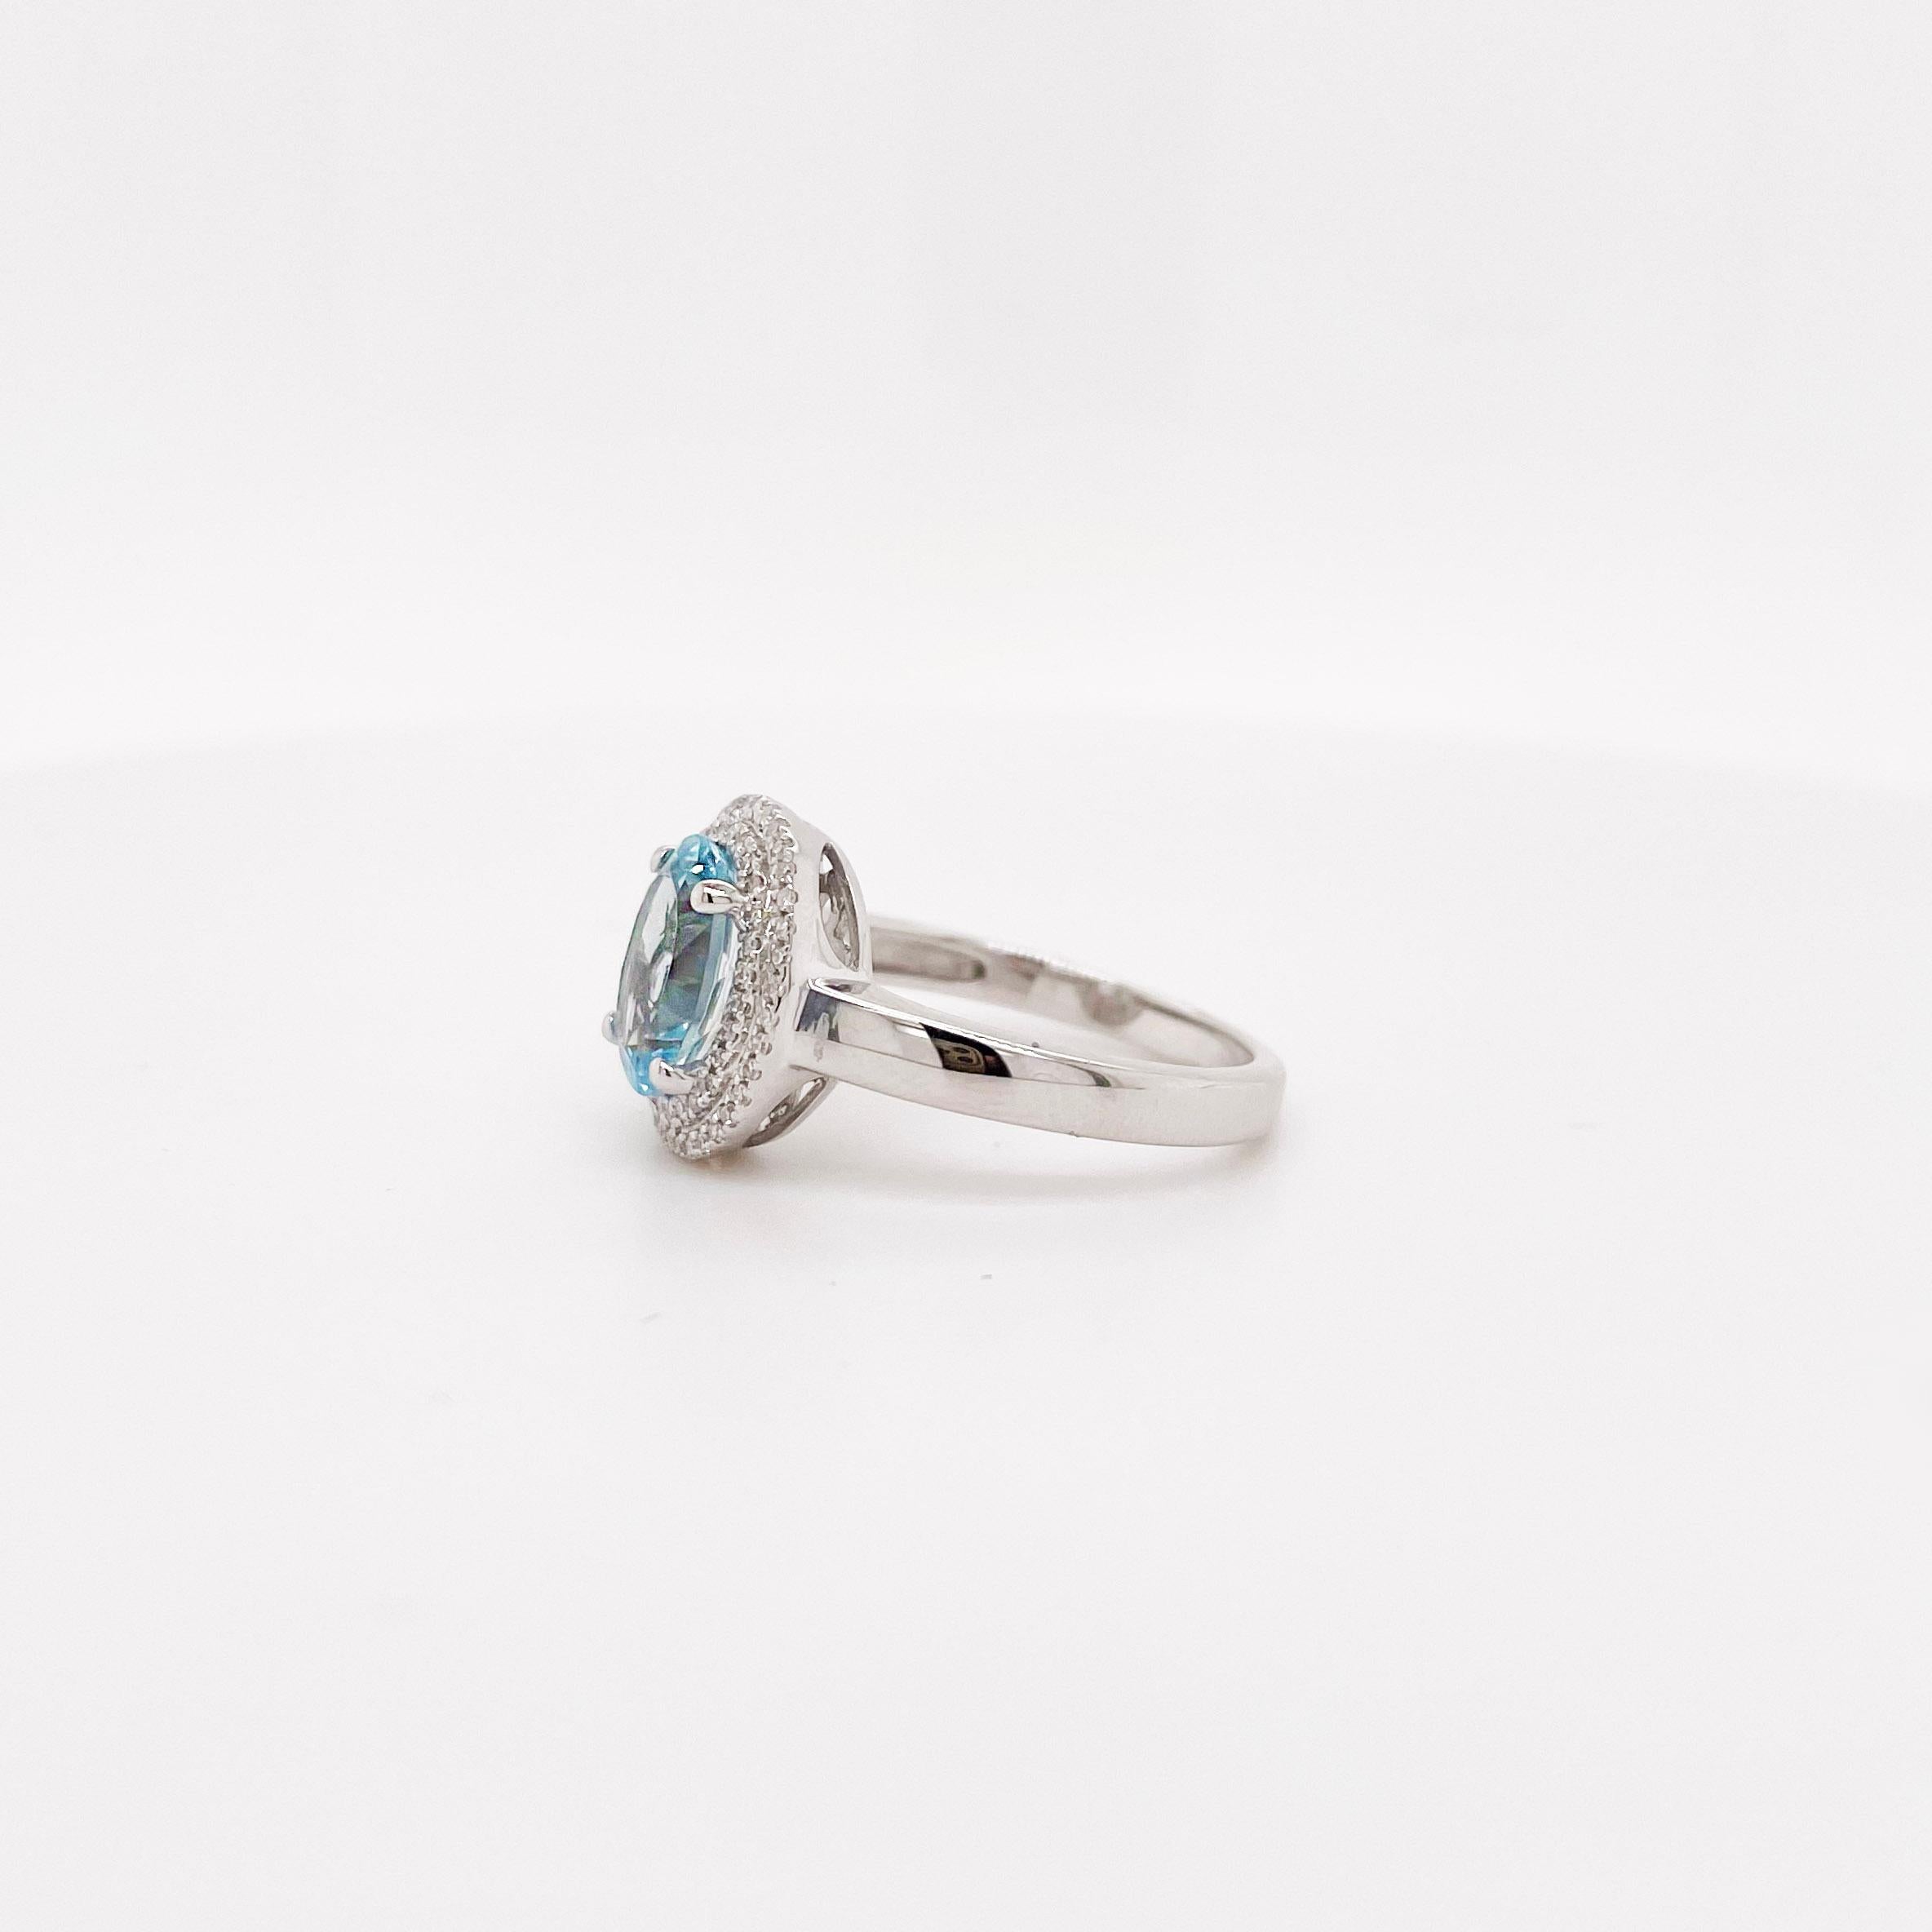 For Sale:  Aquamarine & Double Diamond Halo Ring 14K White Gold March Birthstone Ring 2